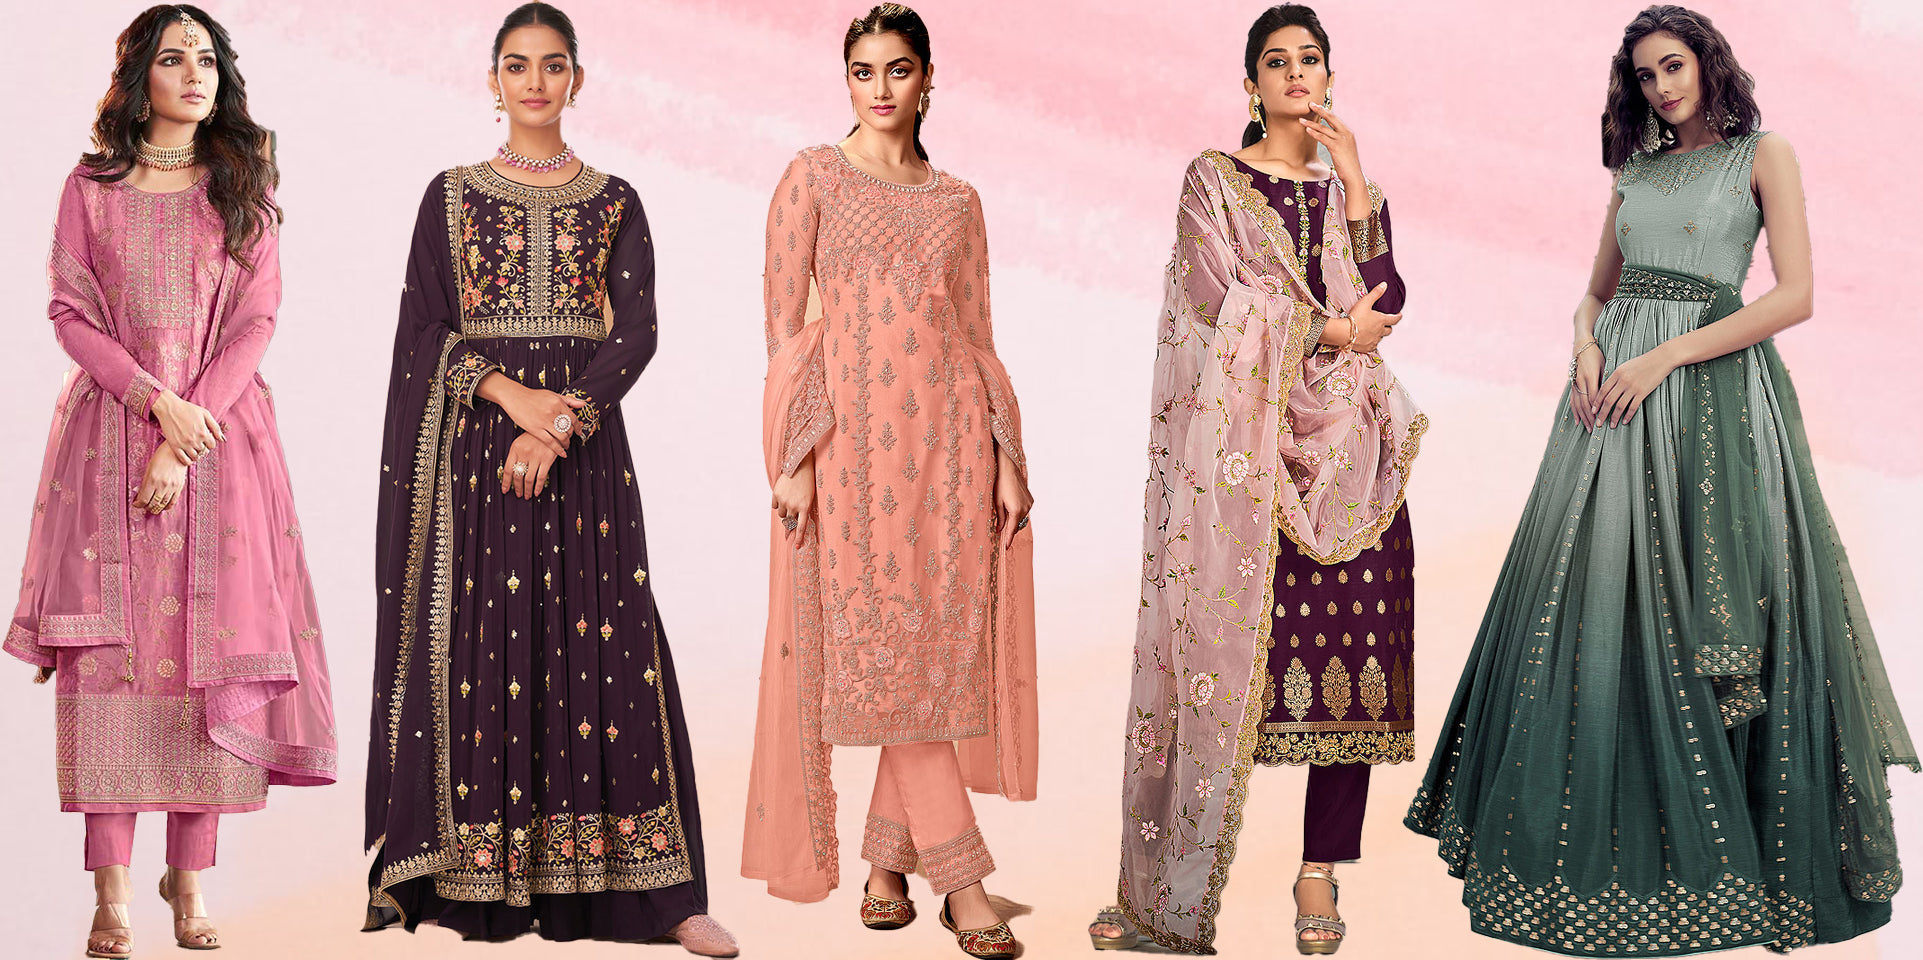 How to Pick the Right Women’s Ethnic Wear Online